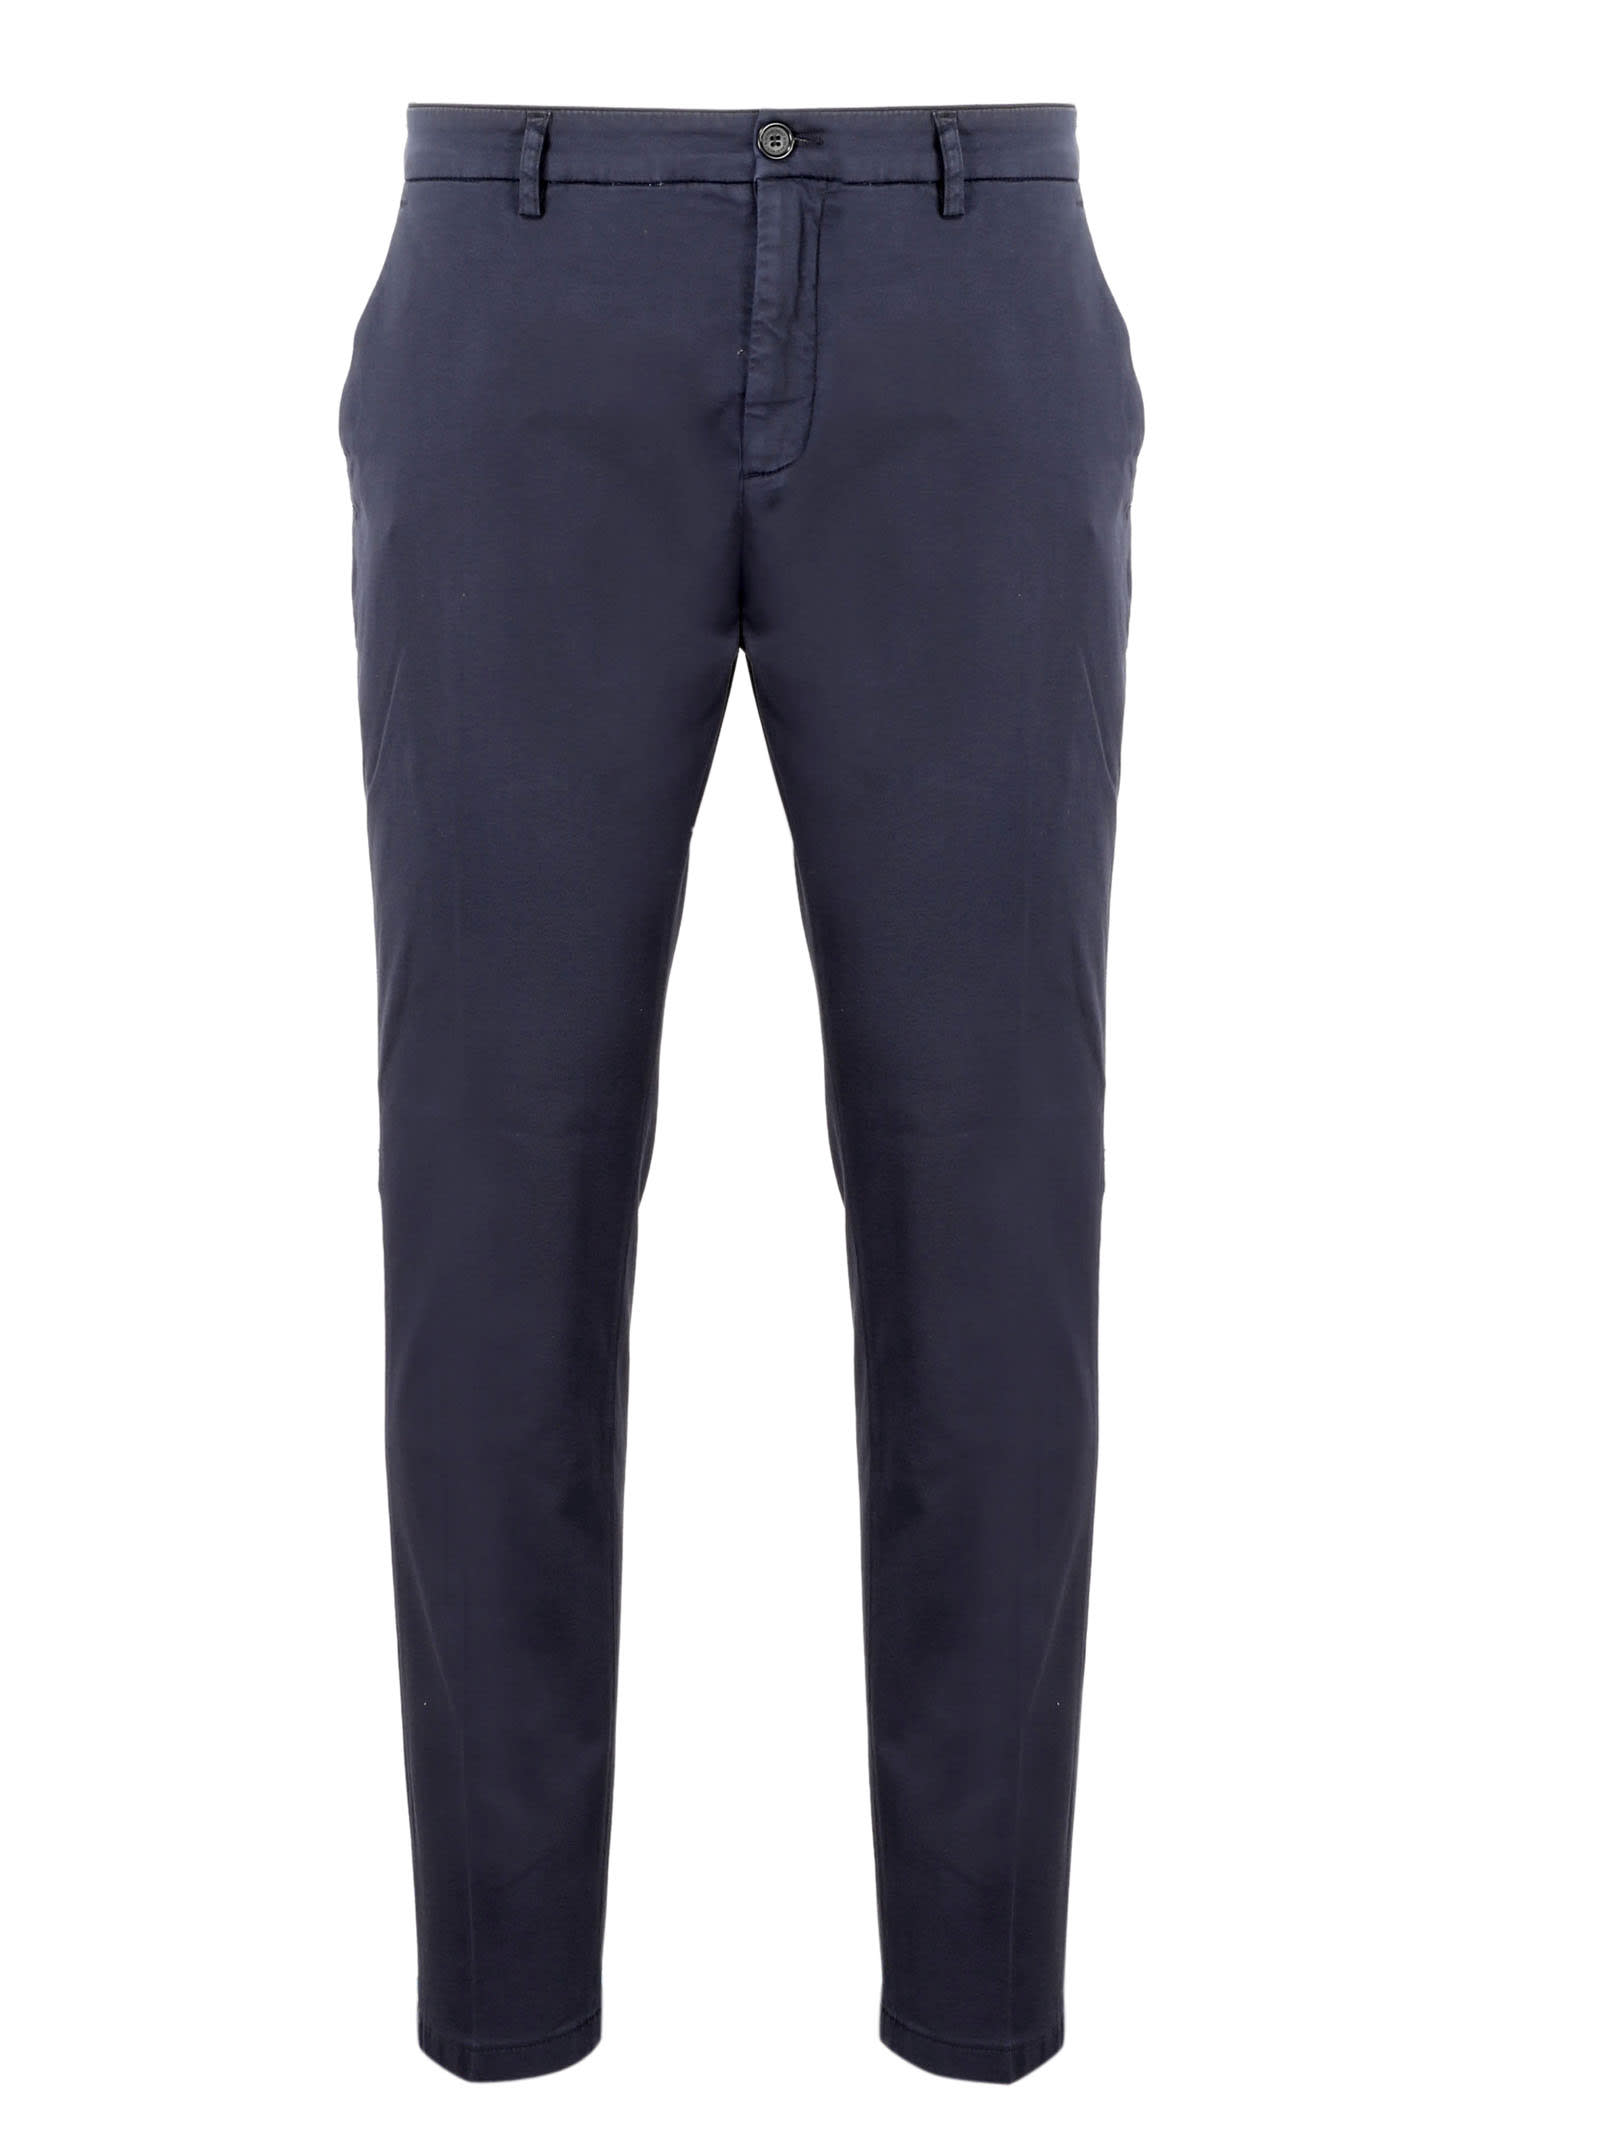 Department 5 Prince Chinos Pants